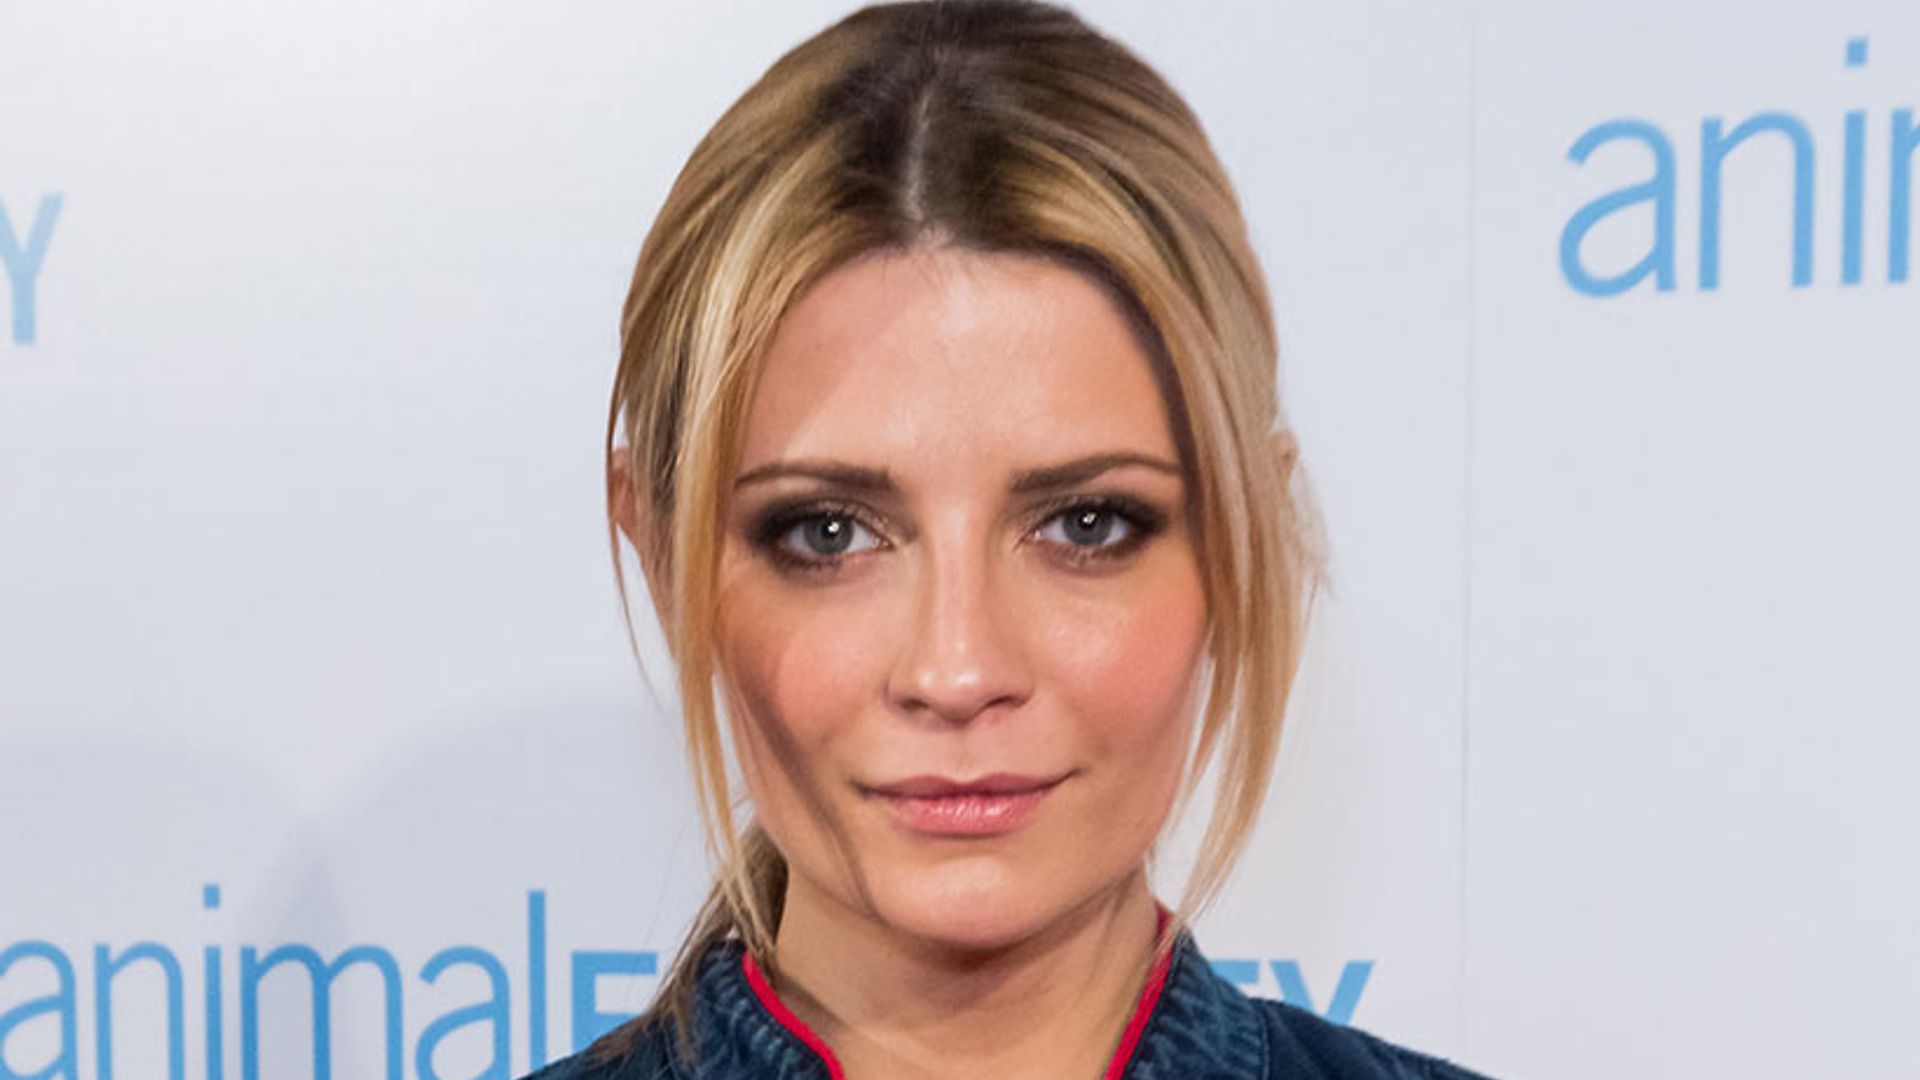 Mischa Barton thanks fans for support after hospitalisation: 'It means the world to me'